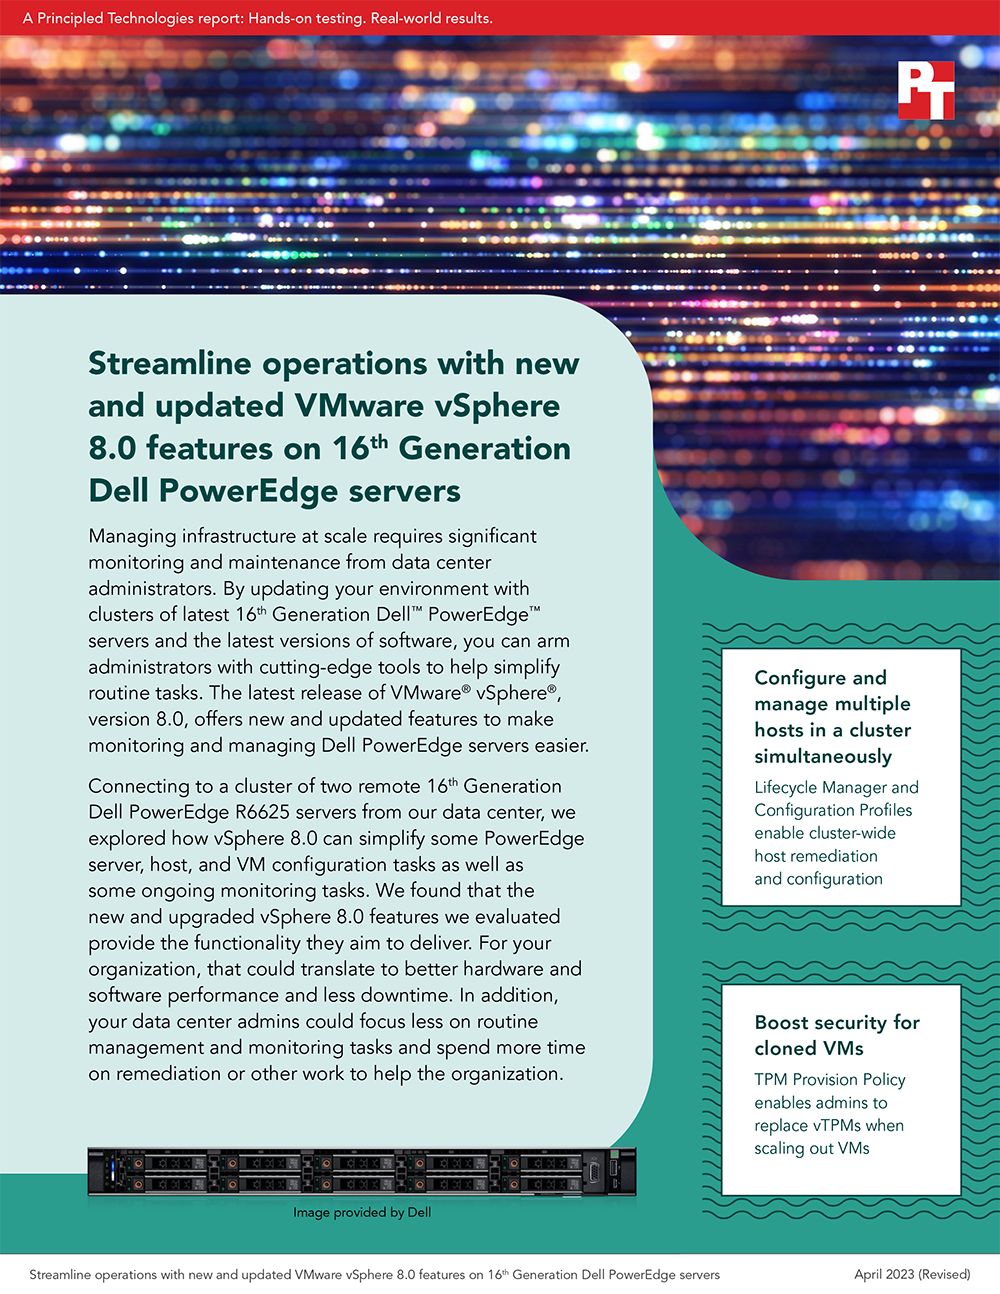  Streamline operations with new and updated VMware vSphere 8.0 features on 16th Generation Dell PowerEdge servers